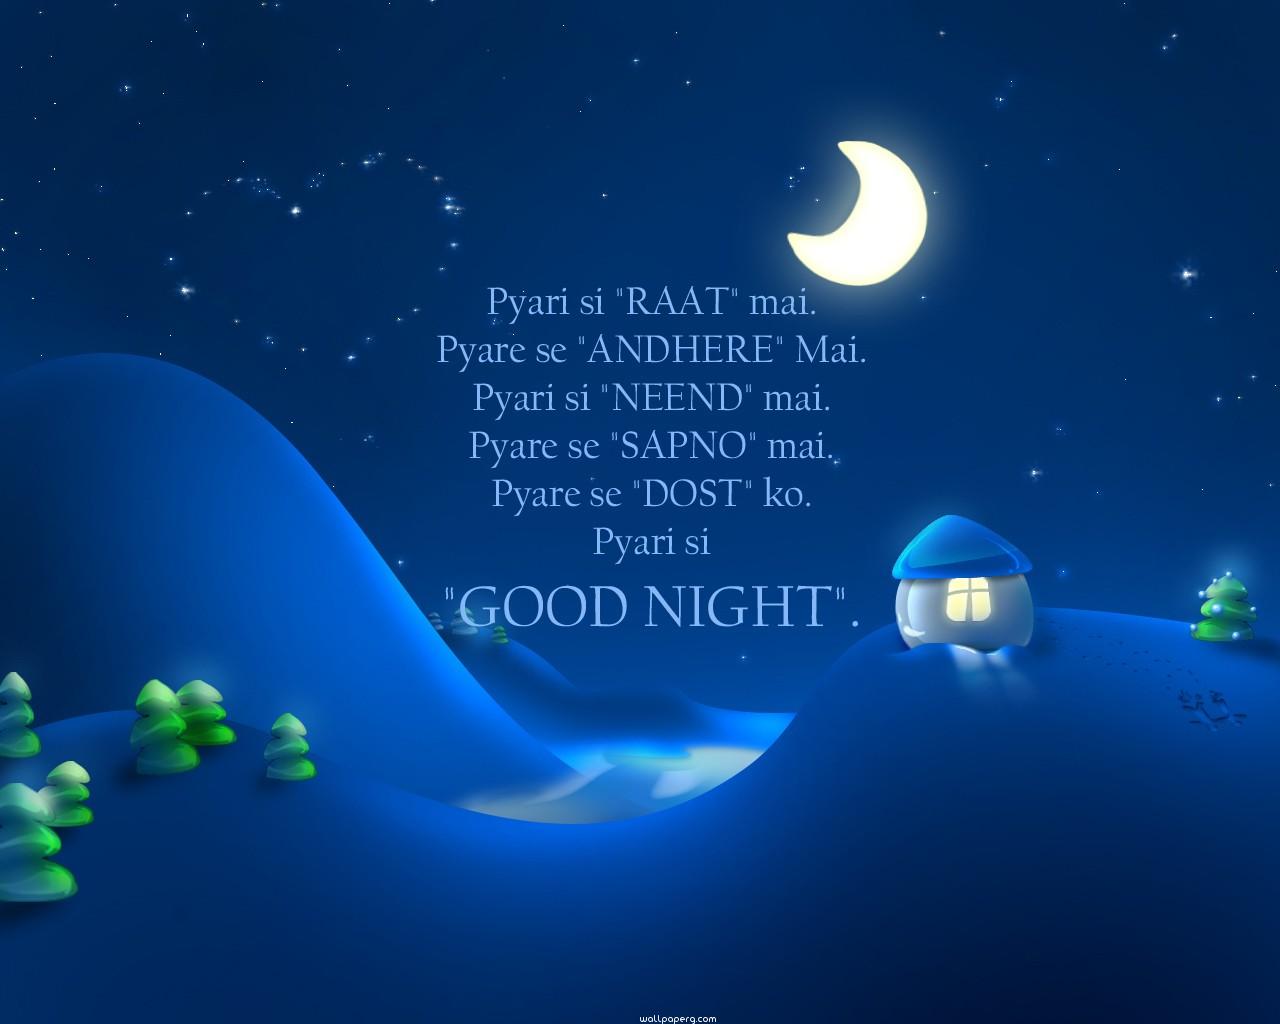 Download Good night hindi quote hd wallpaper - Good night wallpaper for  your mobile cell phone